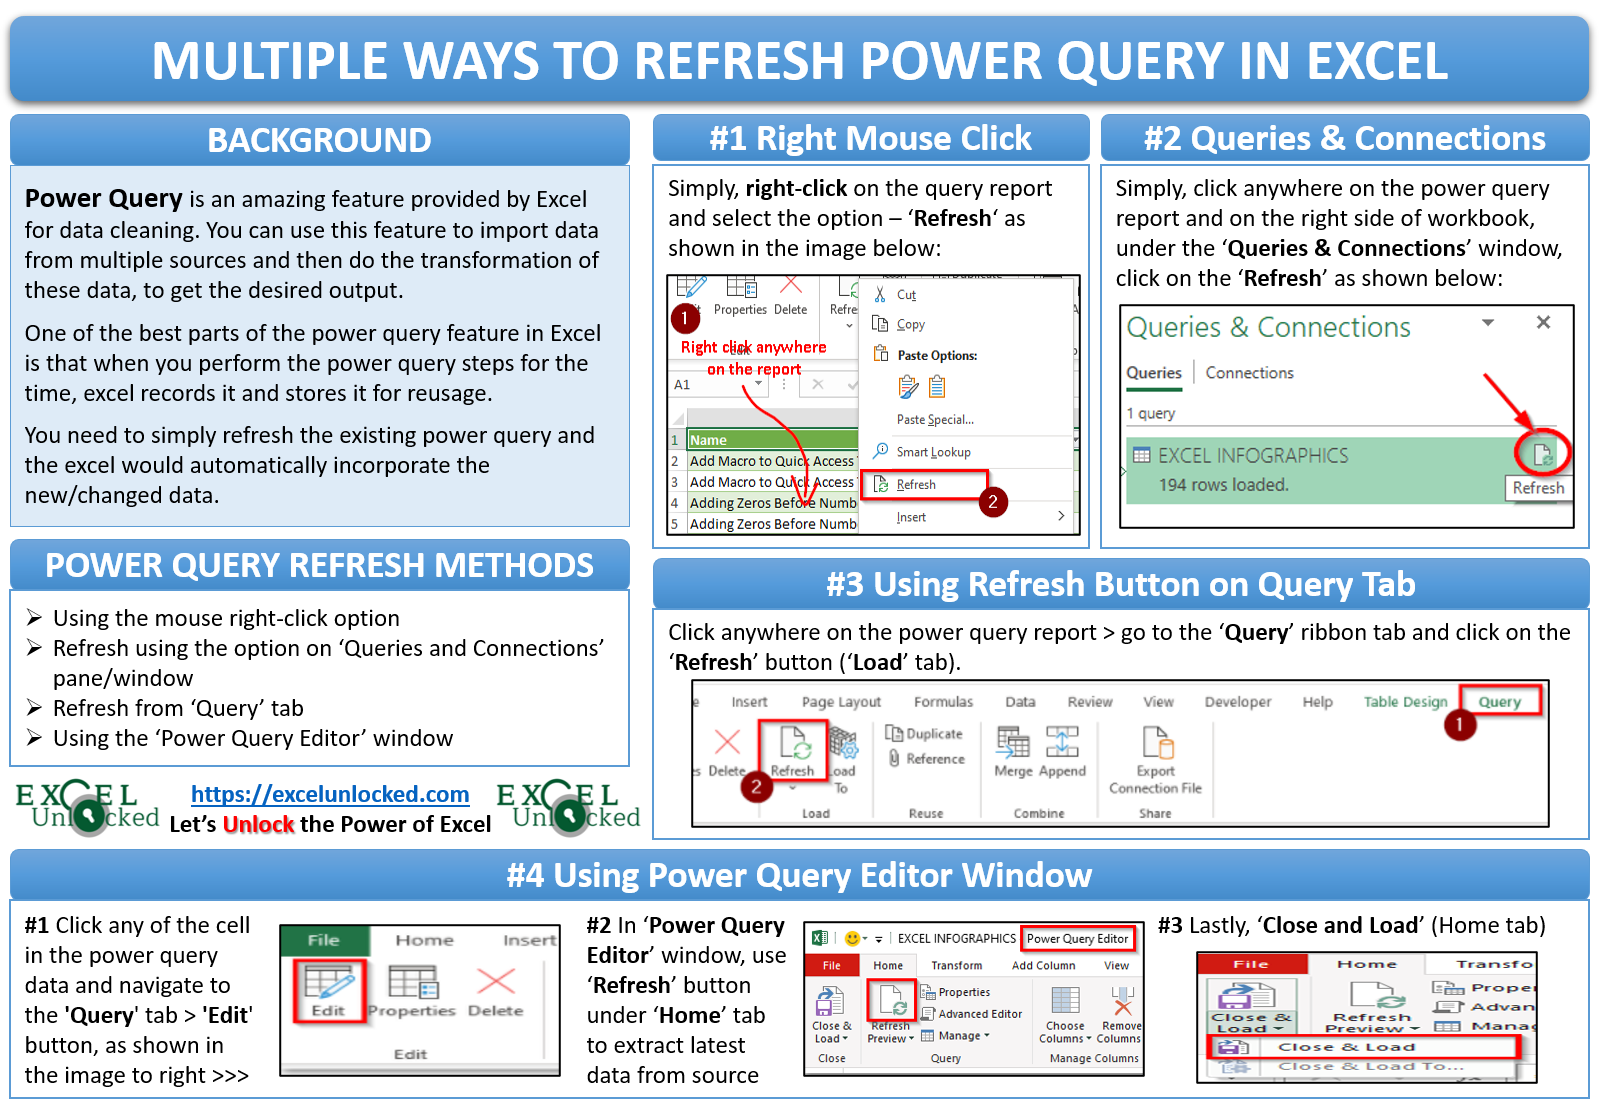 How to Refresh Power Query in Excel